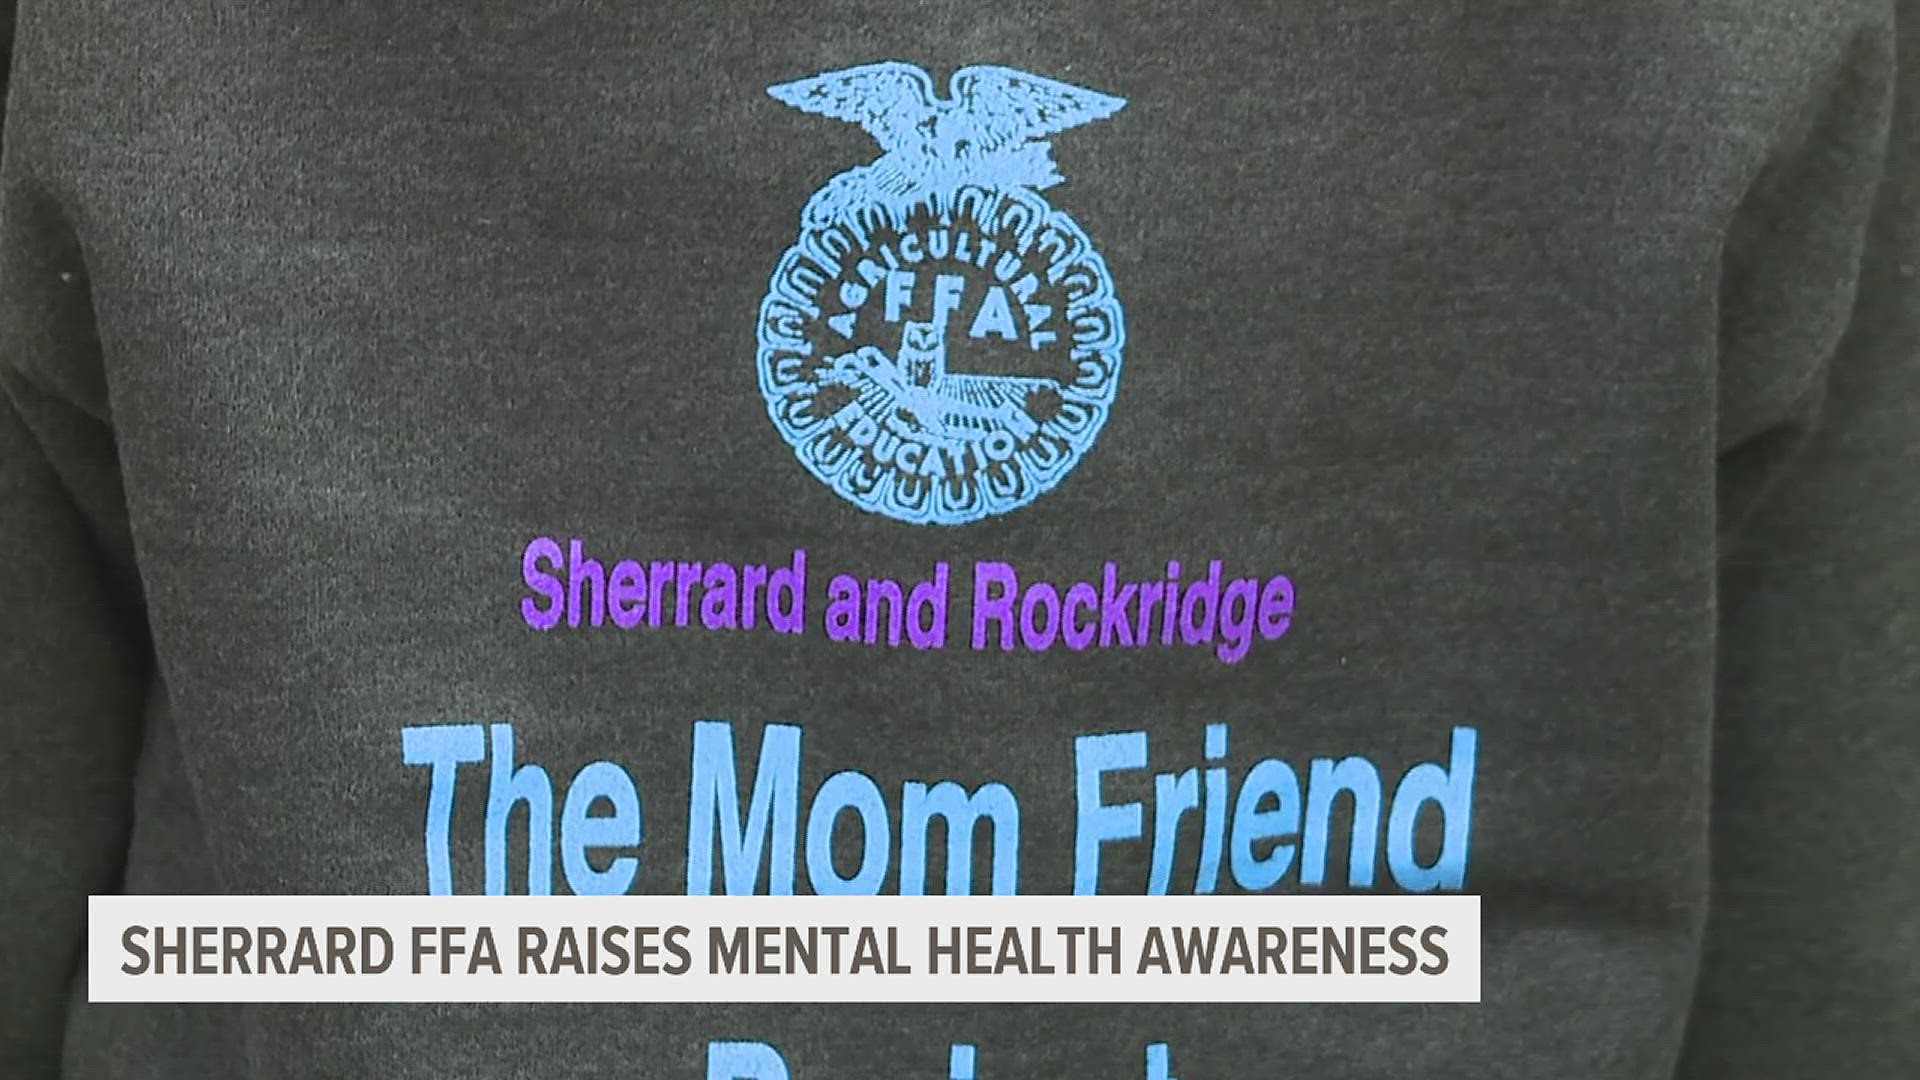 The group was created three years ago after a Sherrard High School student died by suicide.